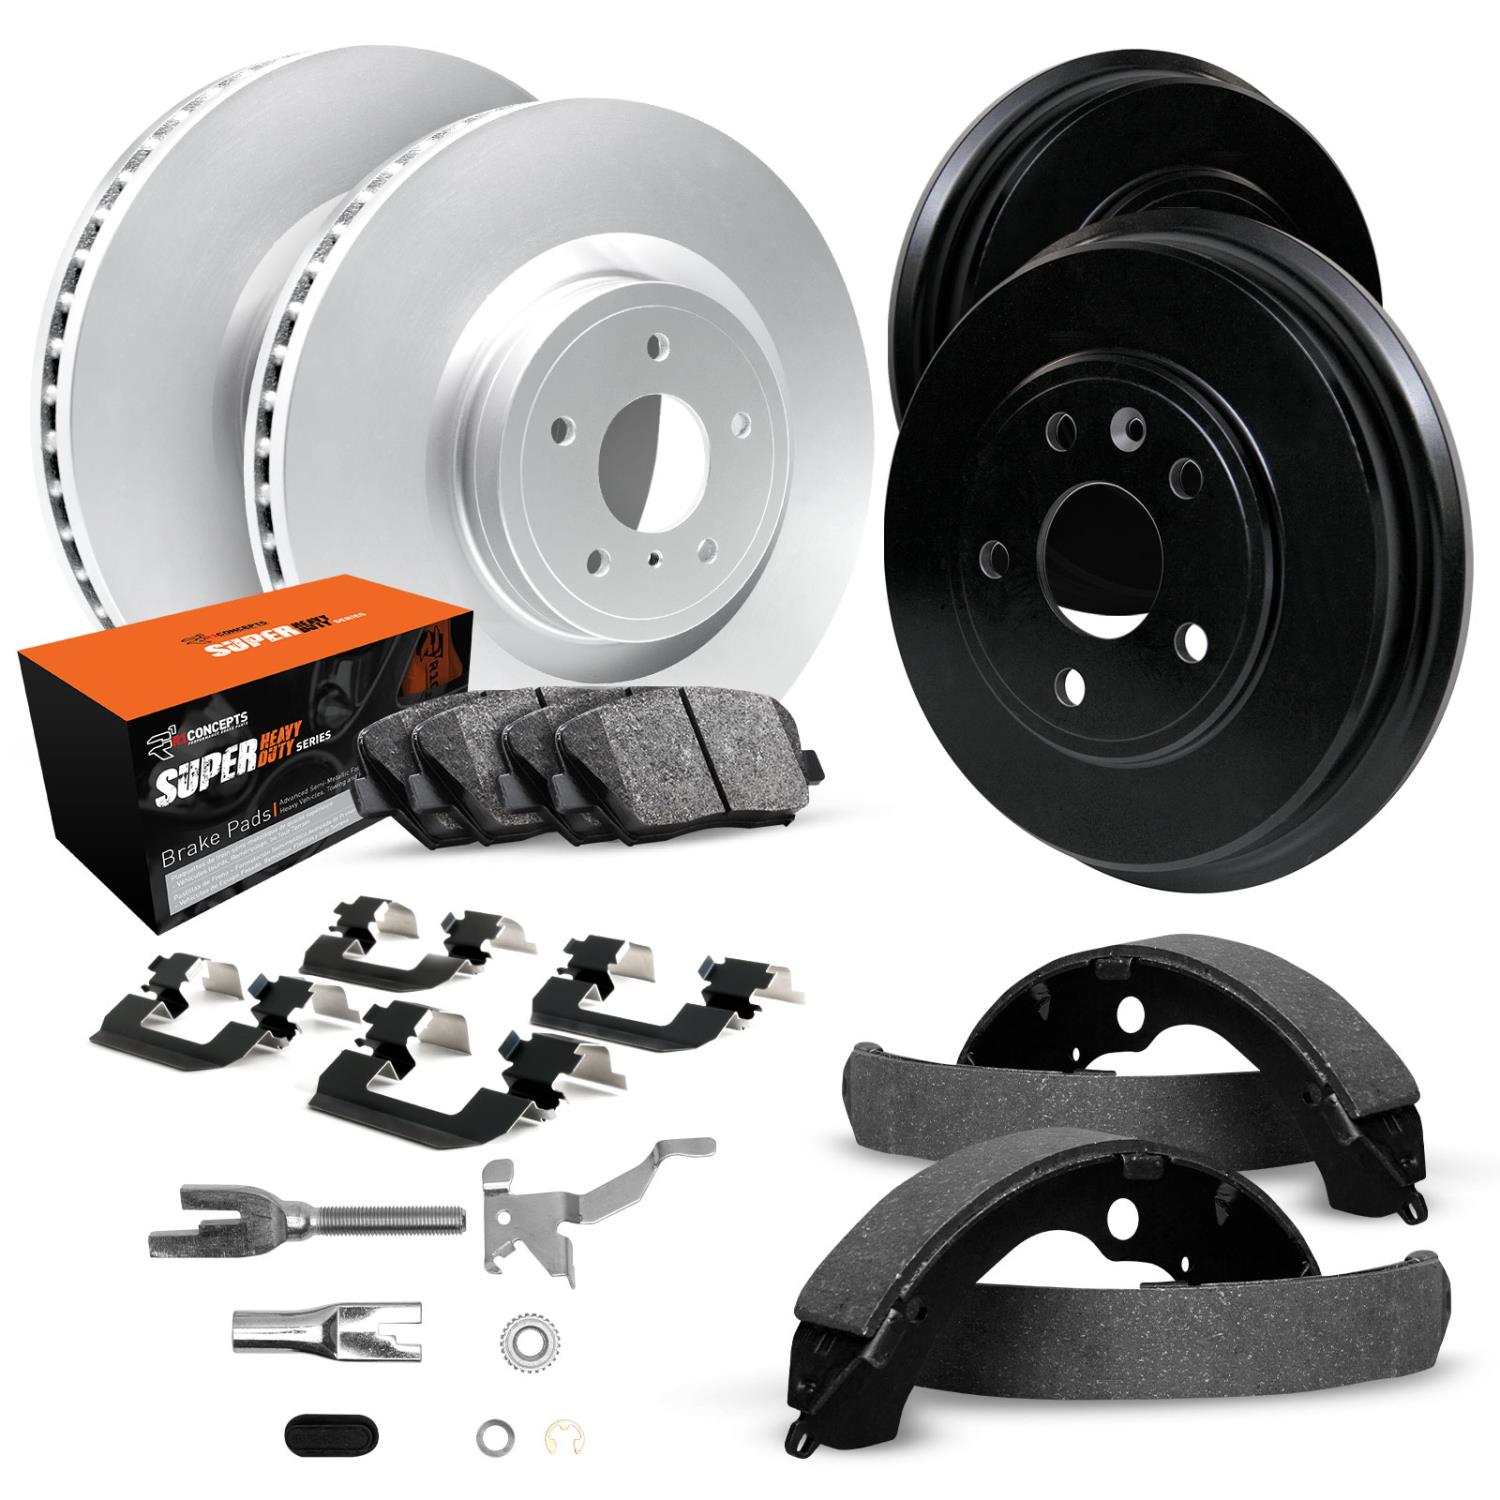 GEO-Carbon Brake Rotor & Drum Set w/Super-Duty Pads, Shoes, Hardware/Adjusters, 1976-1985 Ford/Lincoln/Mercury/Mazda